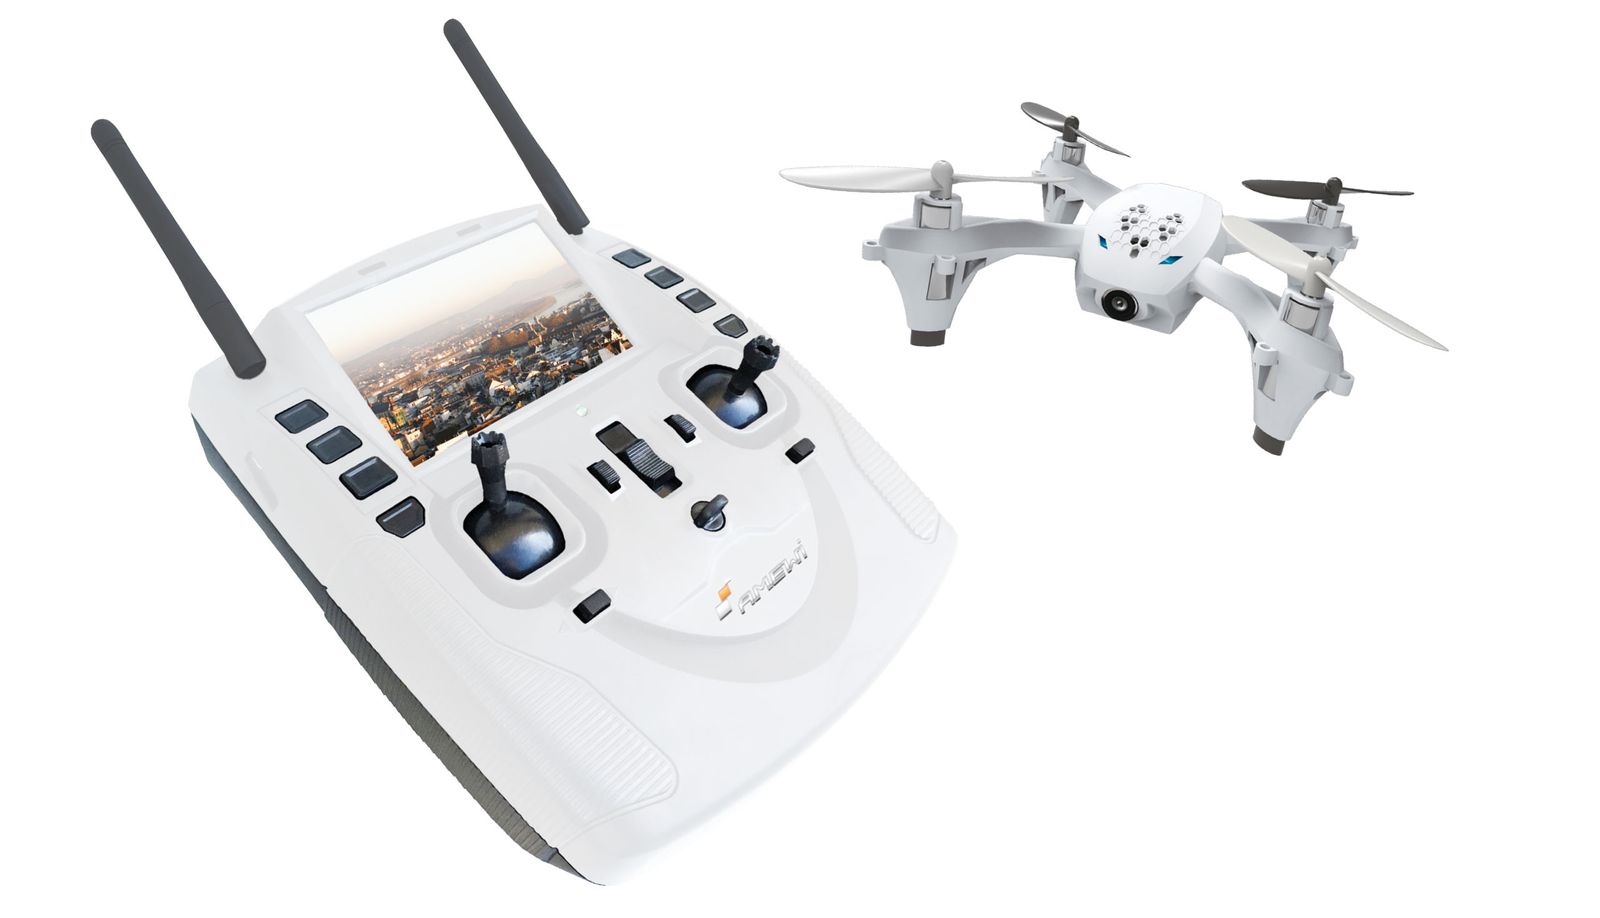 Amewi 25182 AM X Four FPV Copter with Integrated LCD Display, White